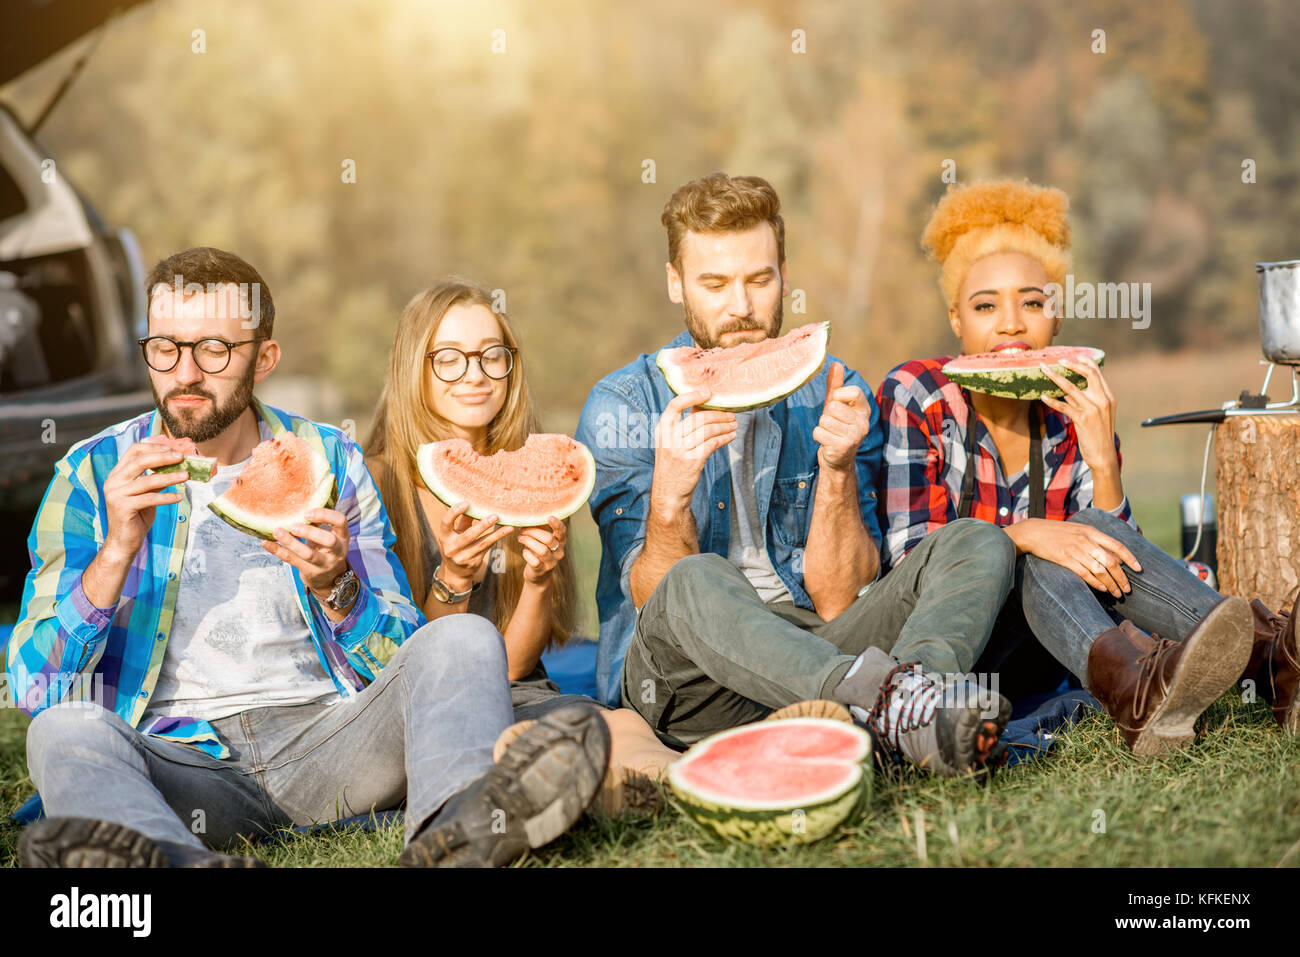 Friends during the outdoor recreation Stock Photo